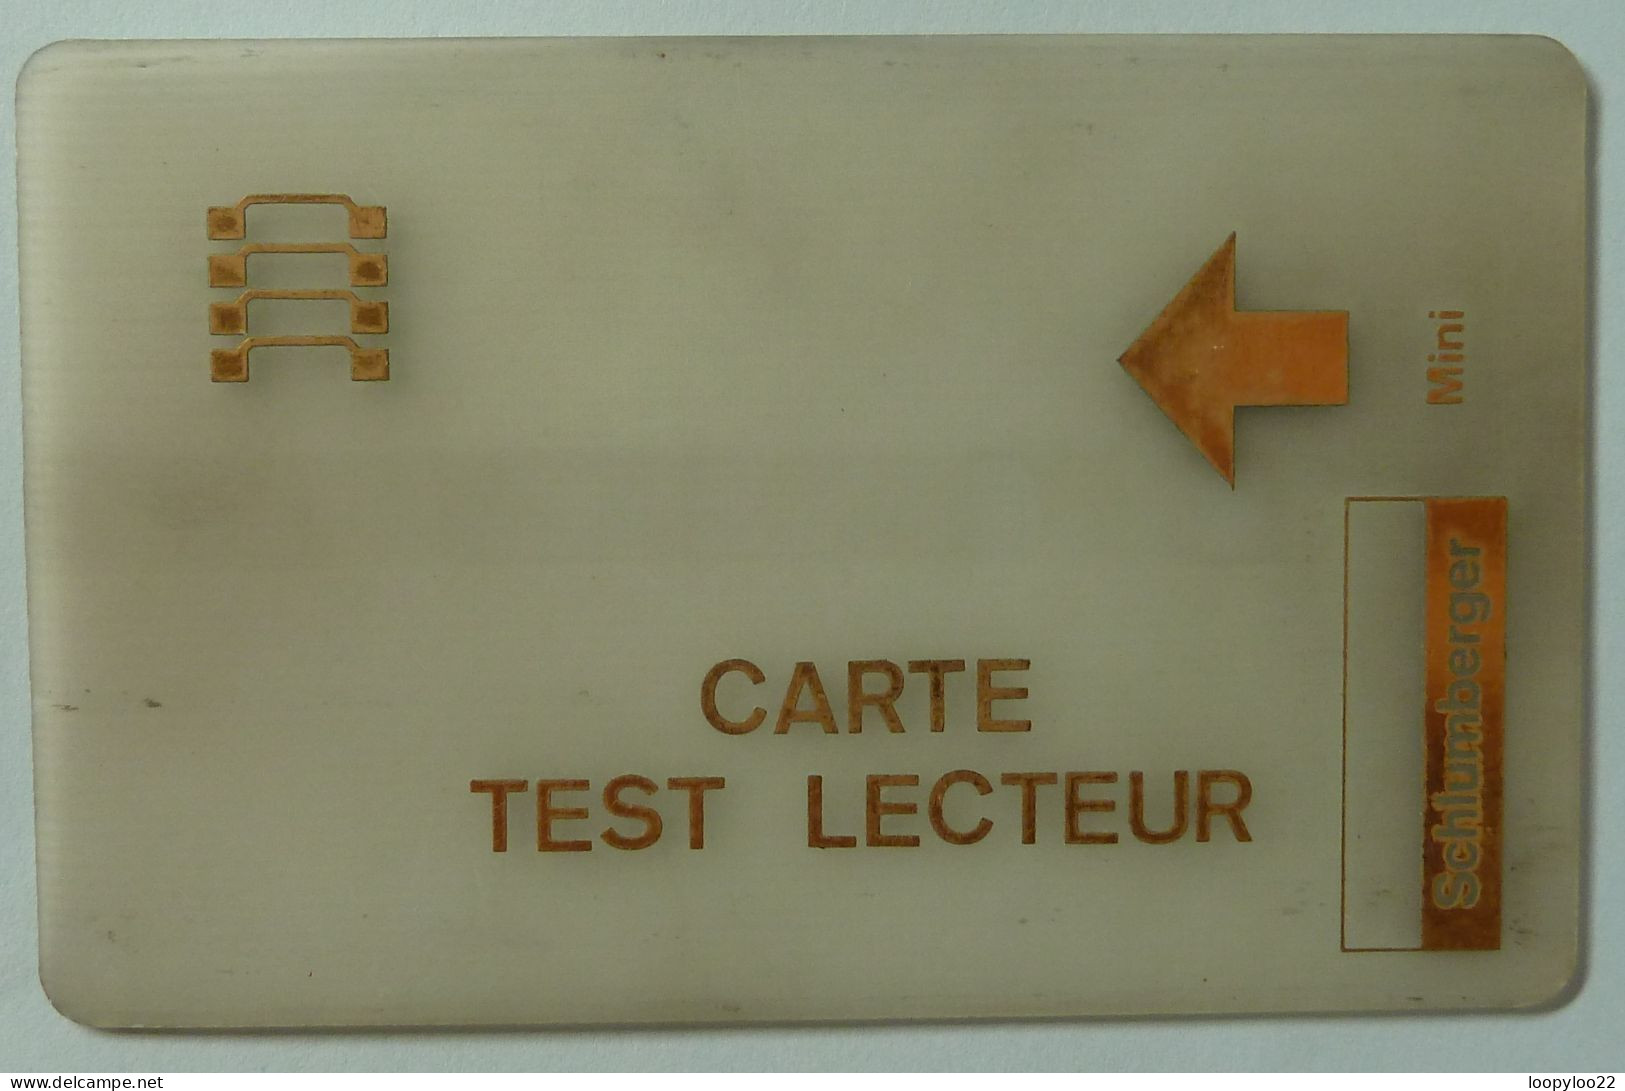 FRANCE - Test For Schlumberger - CARTE TEST LECTEUR - Used For Circuit Testing - R - Sin Clasificación